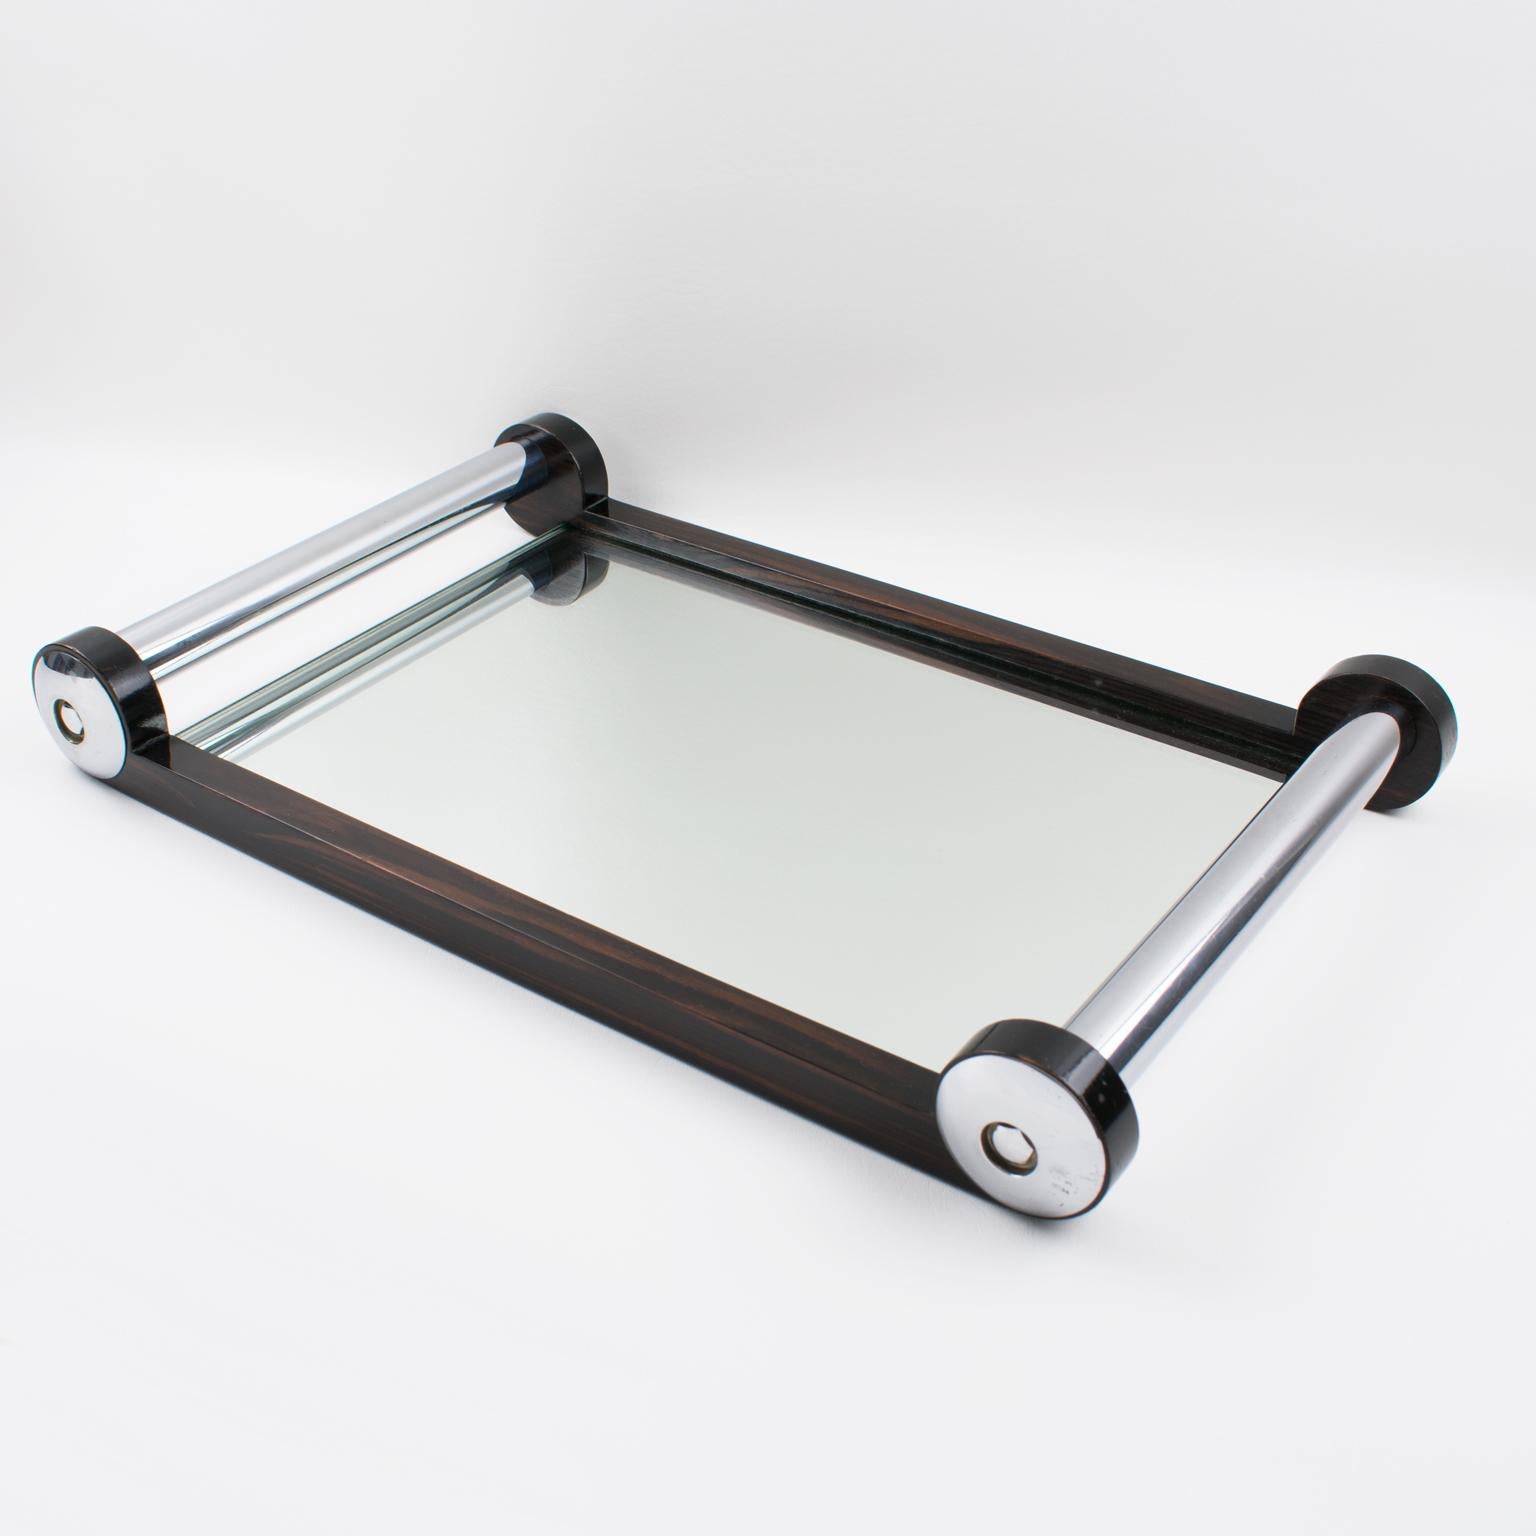 Mid-20th Century French Art Deco Macassar Wood and Mirror Serving Tray with Chrome Handles